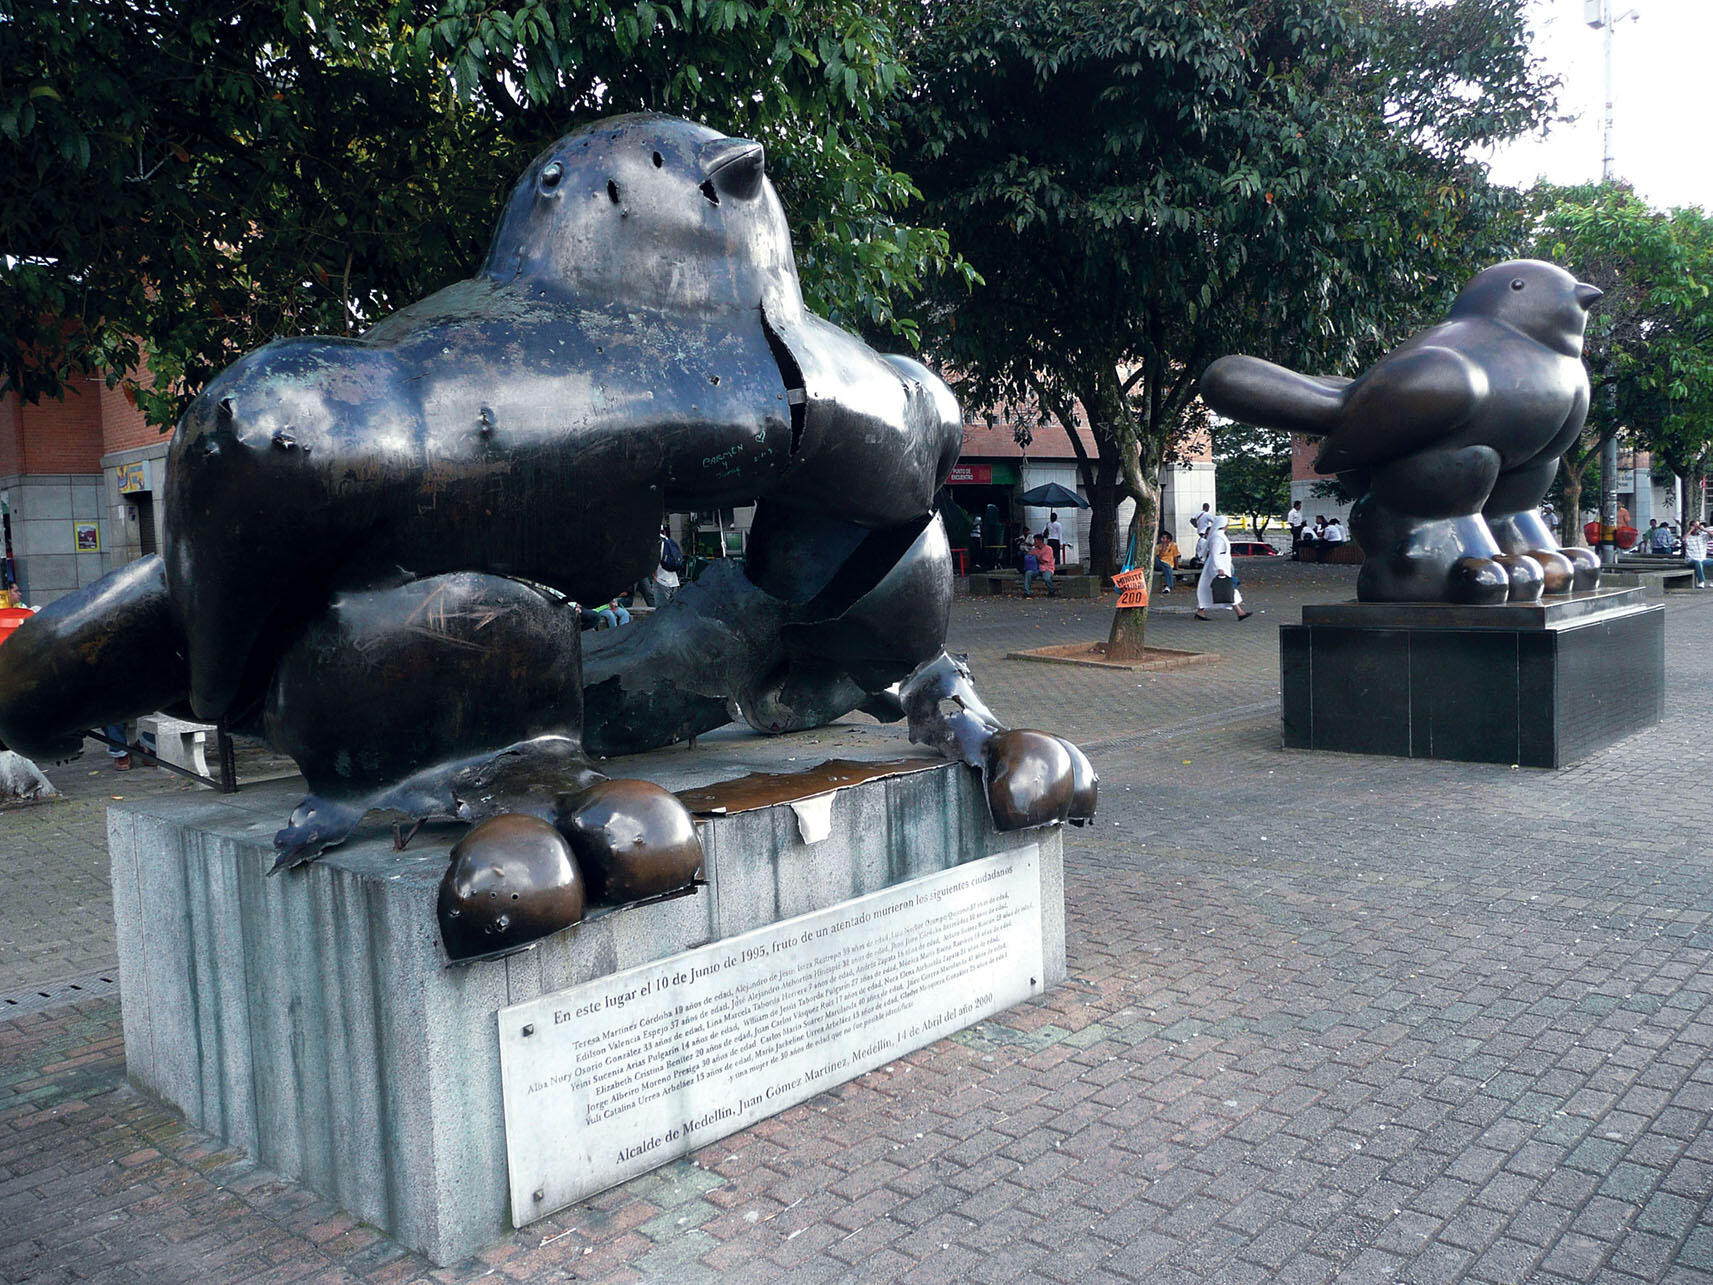 When a bomb damaged the metal statue of a bird on the left, Fernando Botero donated another to Medellín. (Photo by Randal Sheppard.)